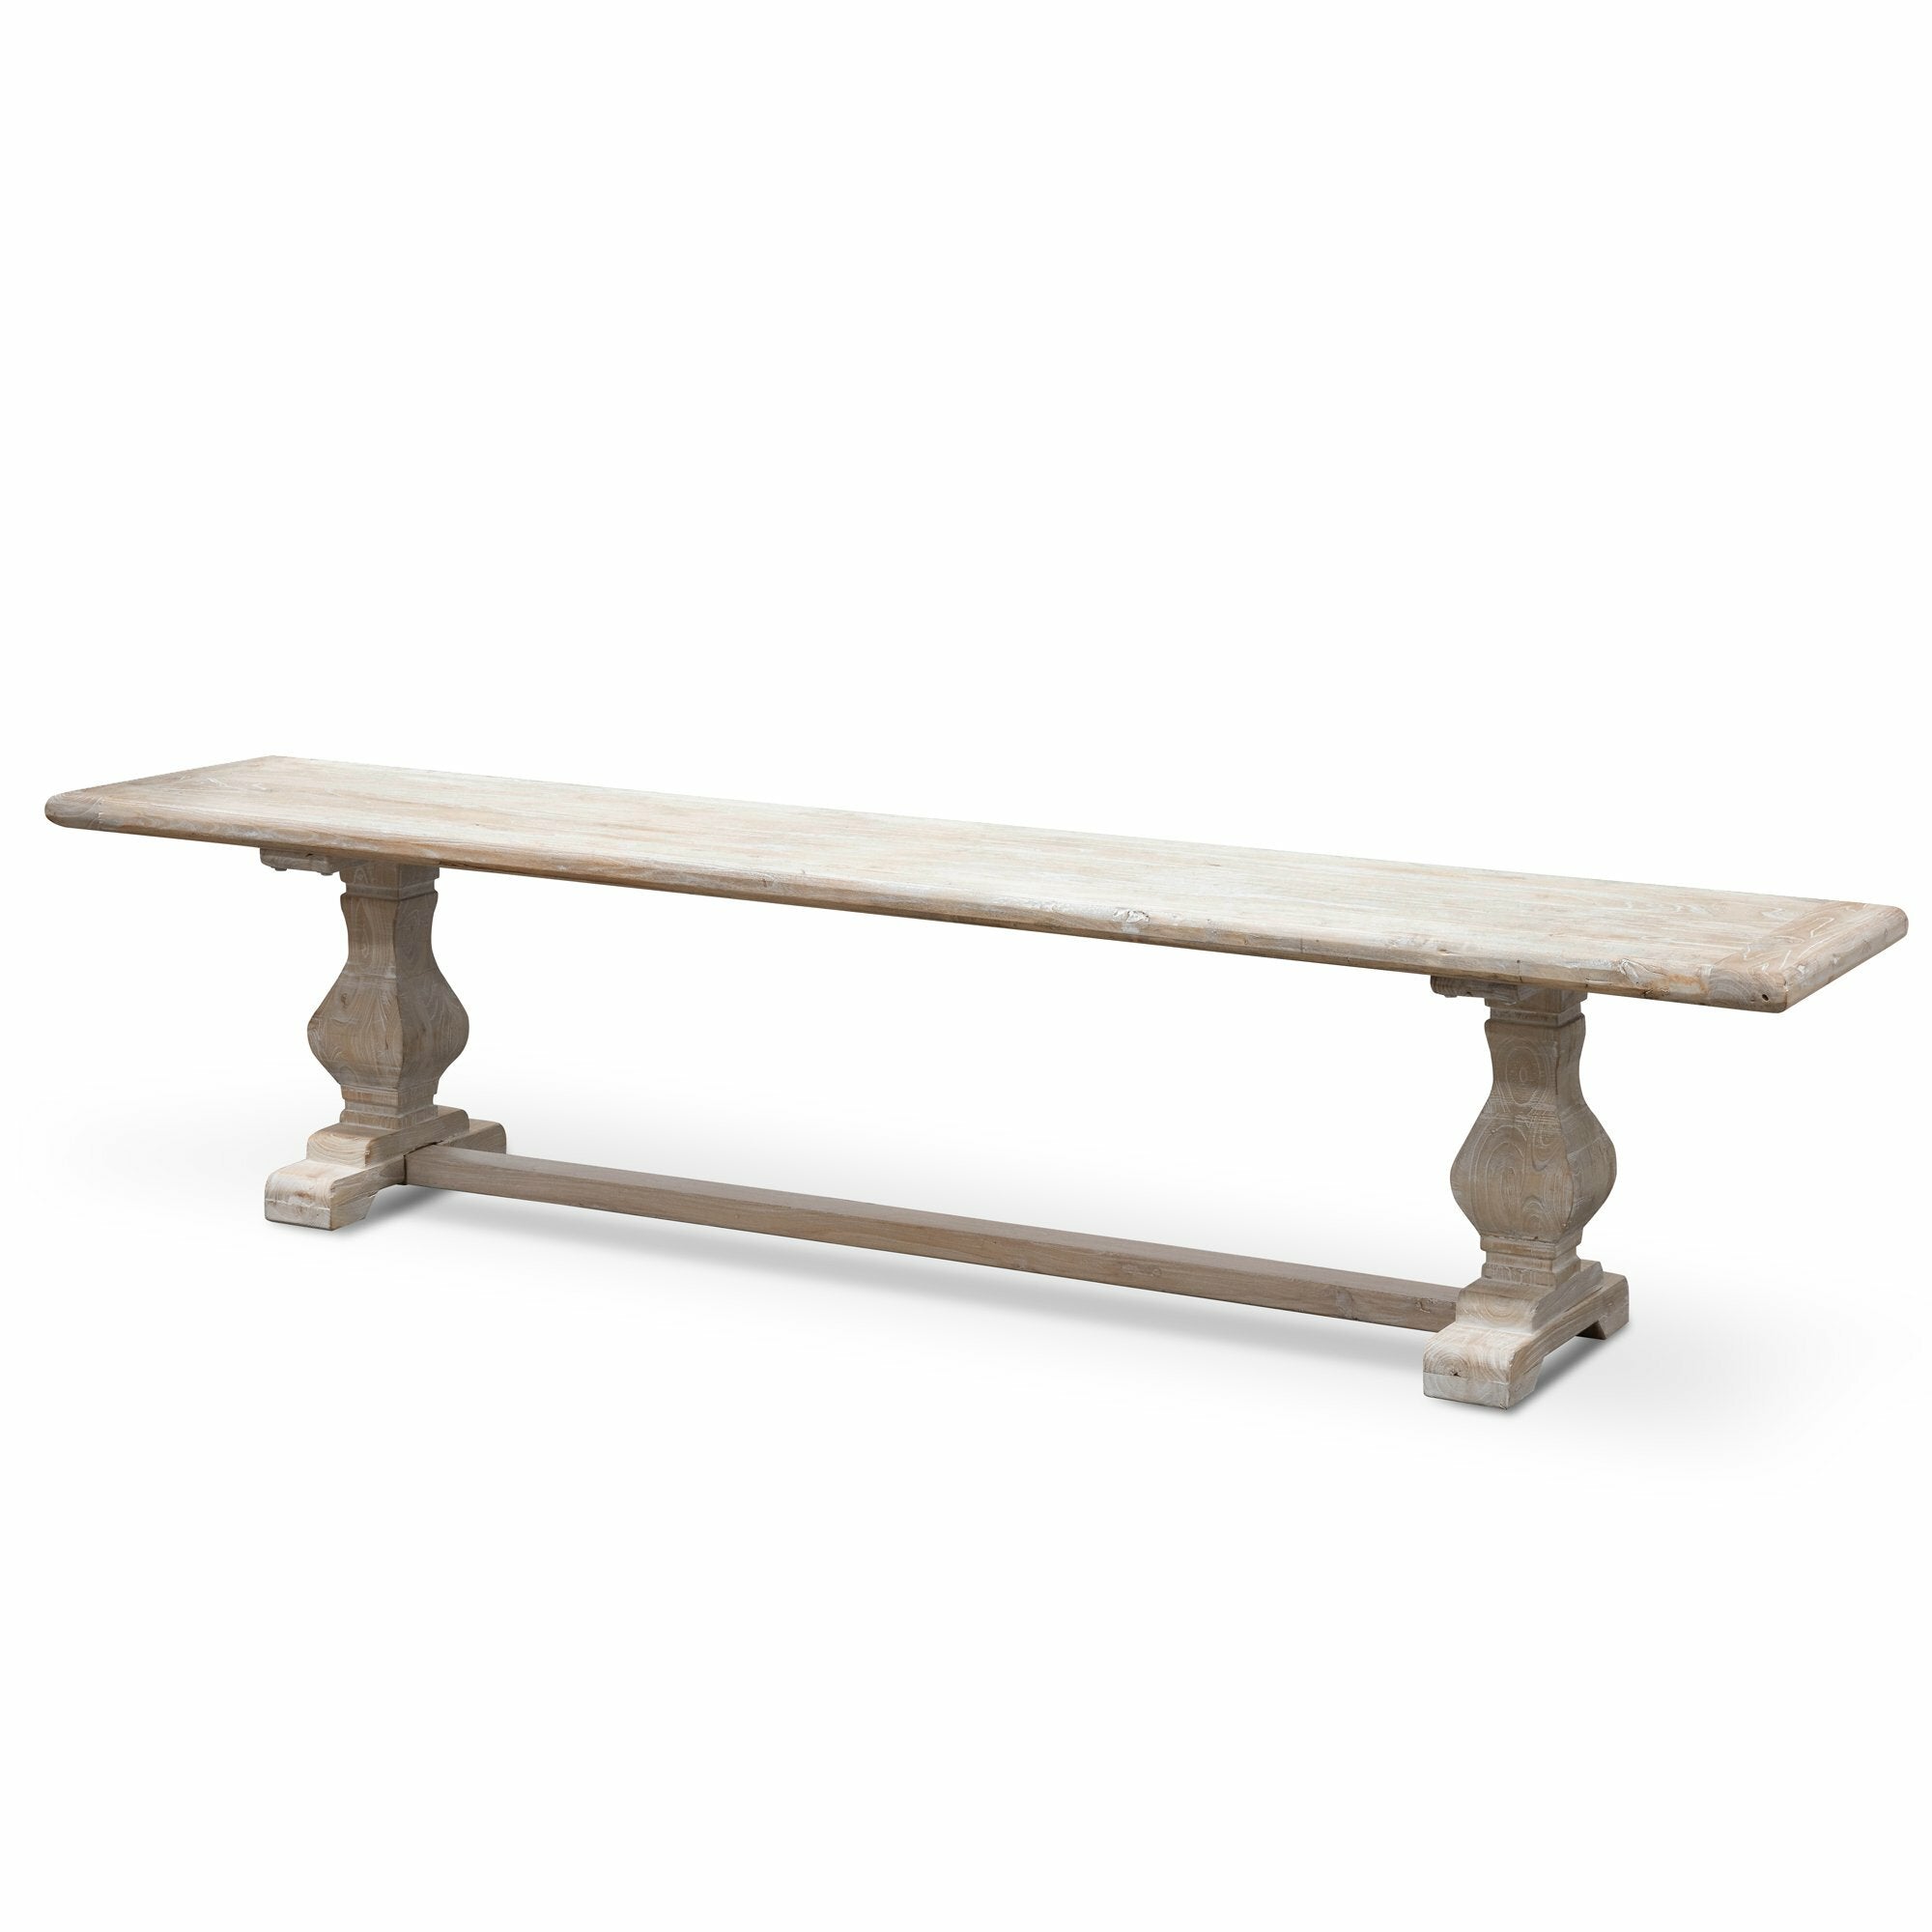 Titan 2m Reclaimed ELM Wood Bench - White Washed